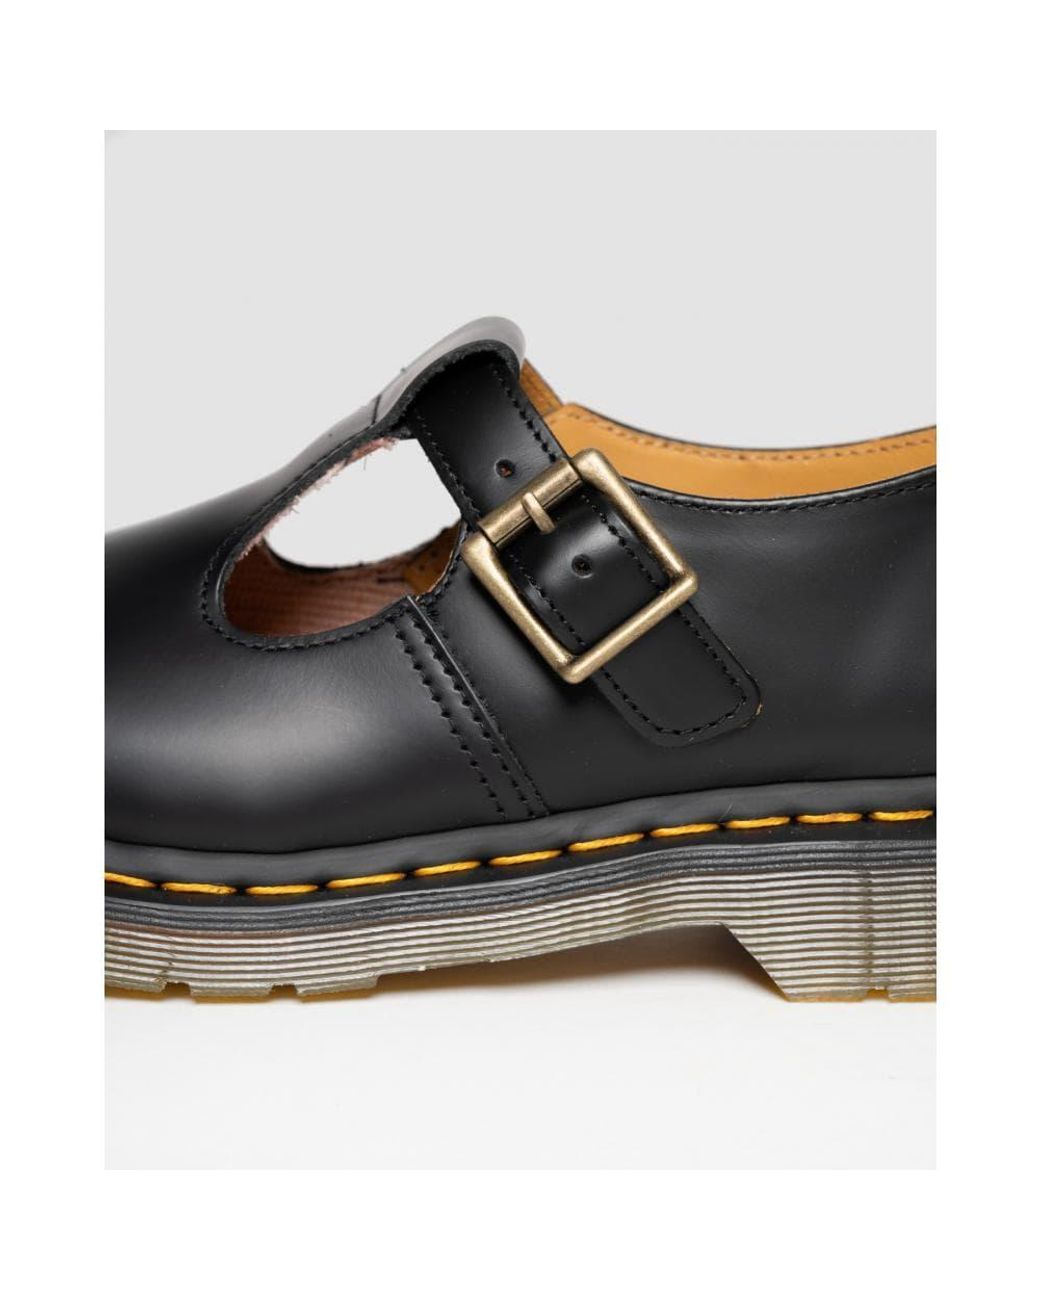 Dr. Martens Polley Smooth Mary Jane Shoes in Black | Lyst